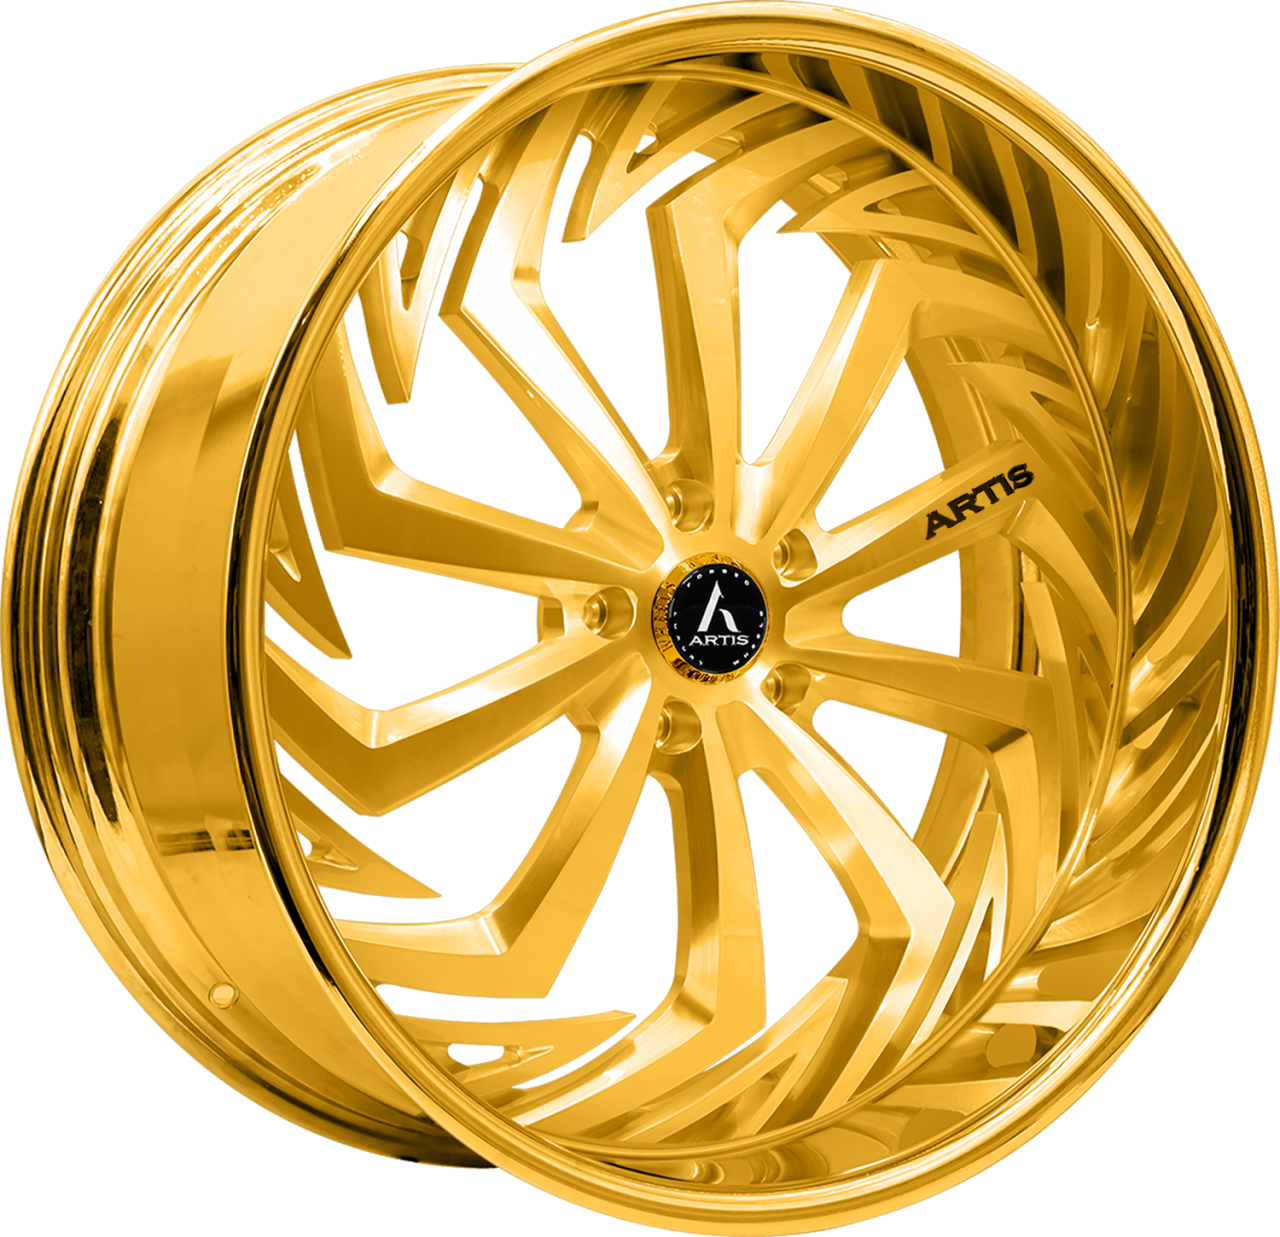 Artis Forged Royal-M wheel with Gold finish